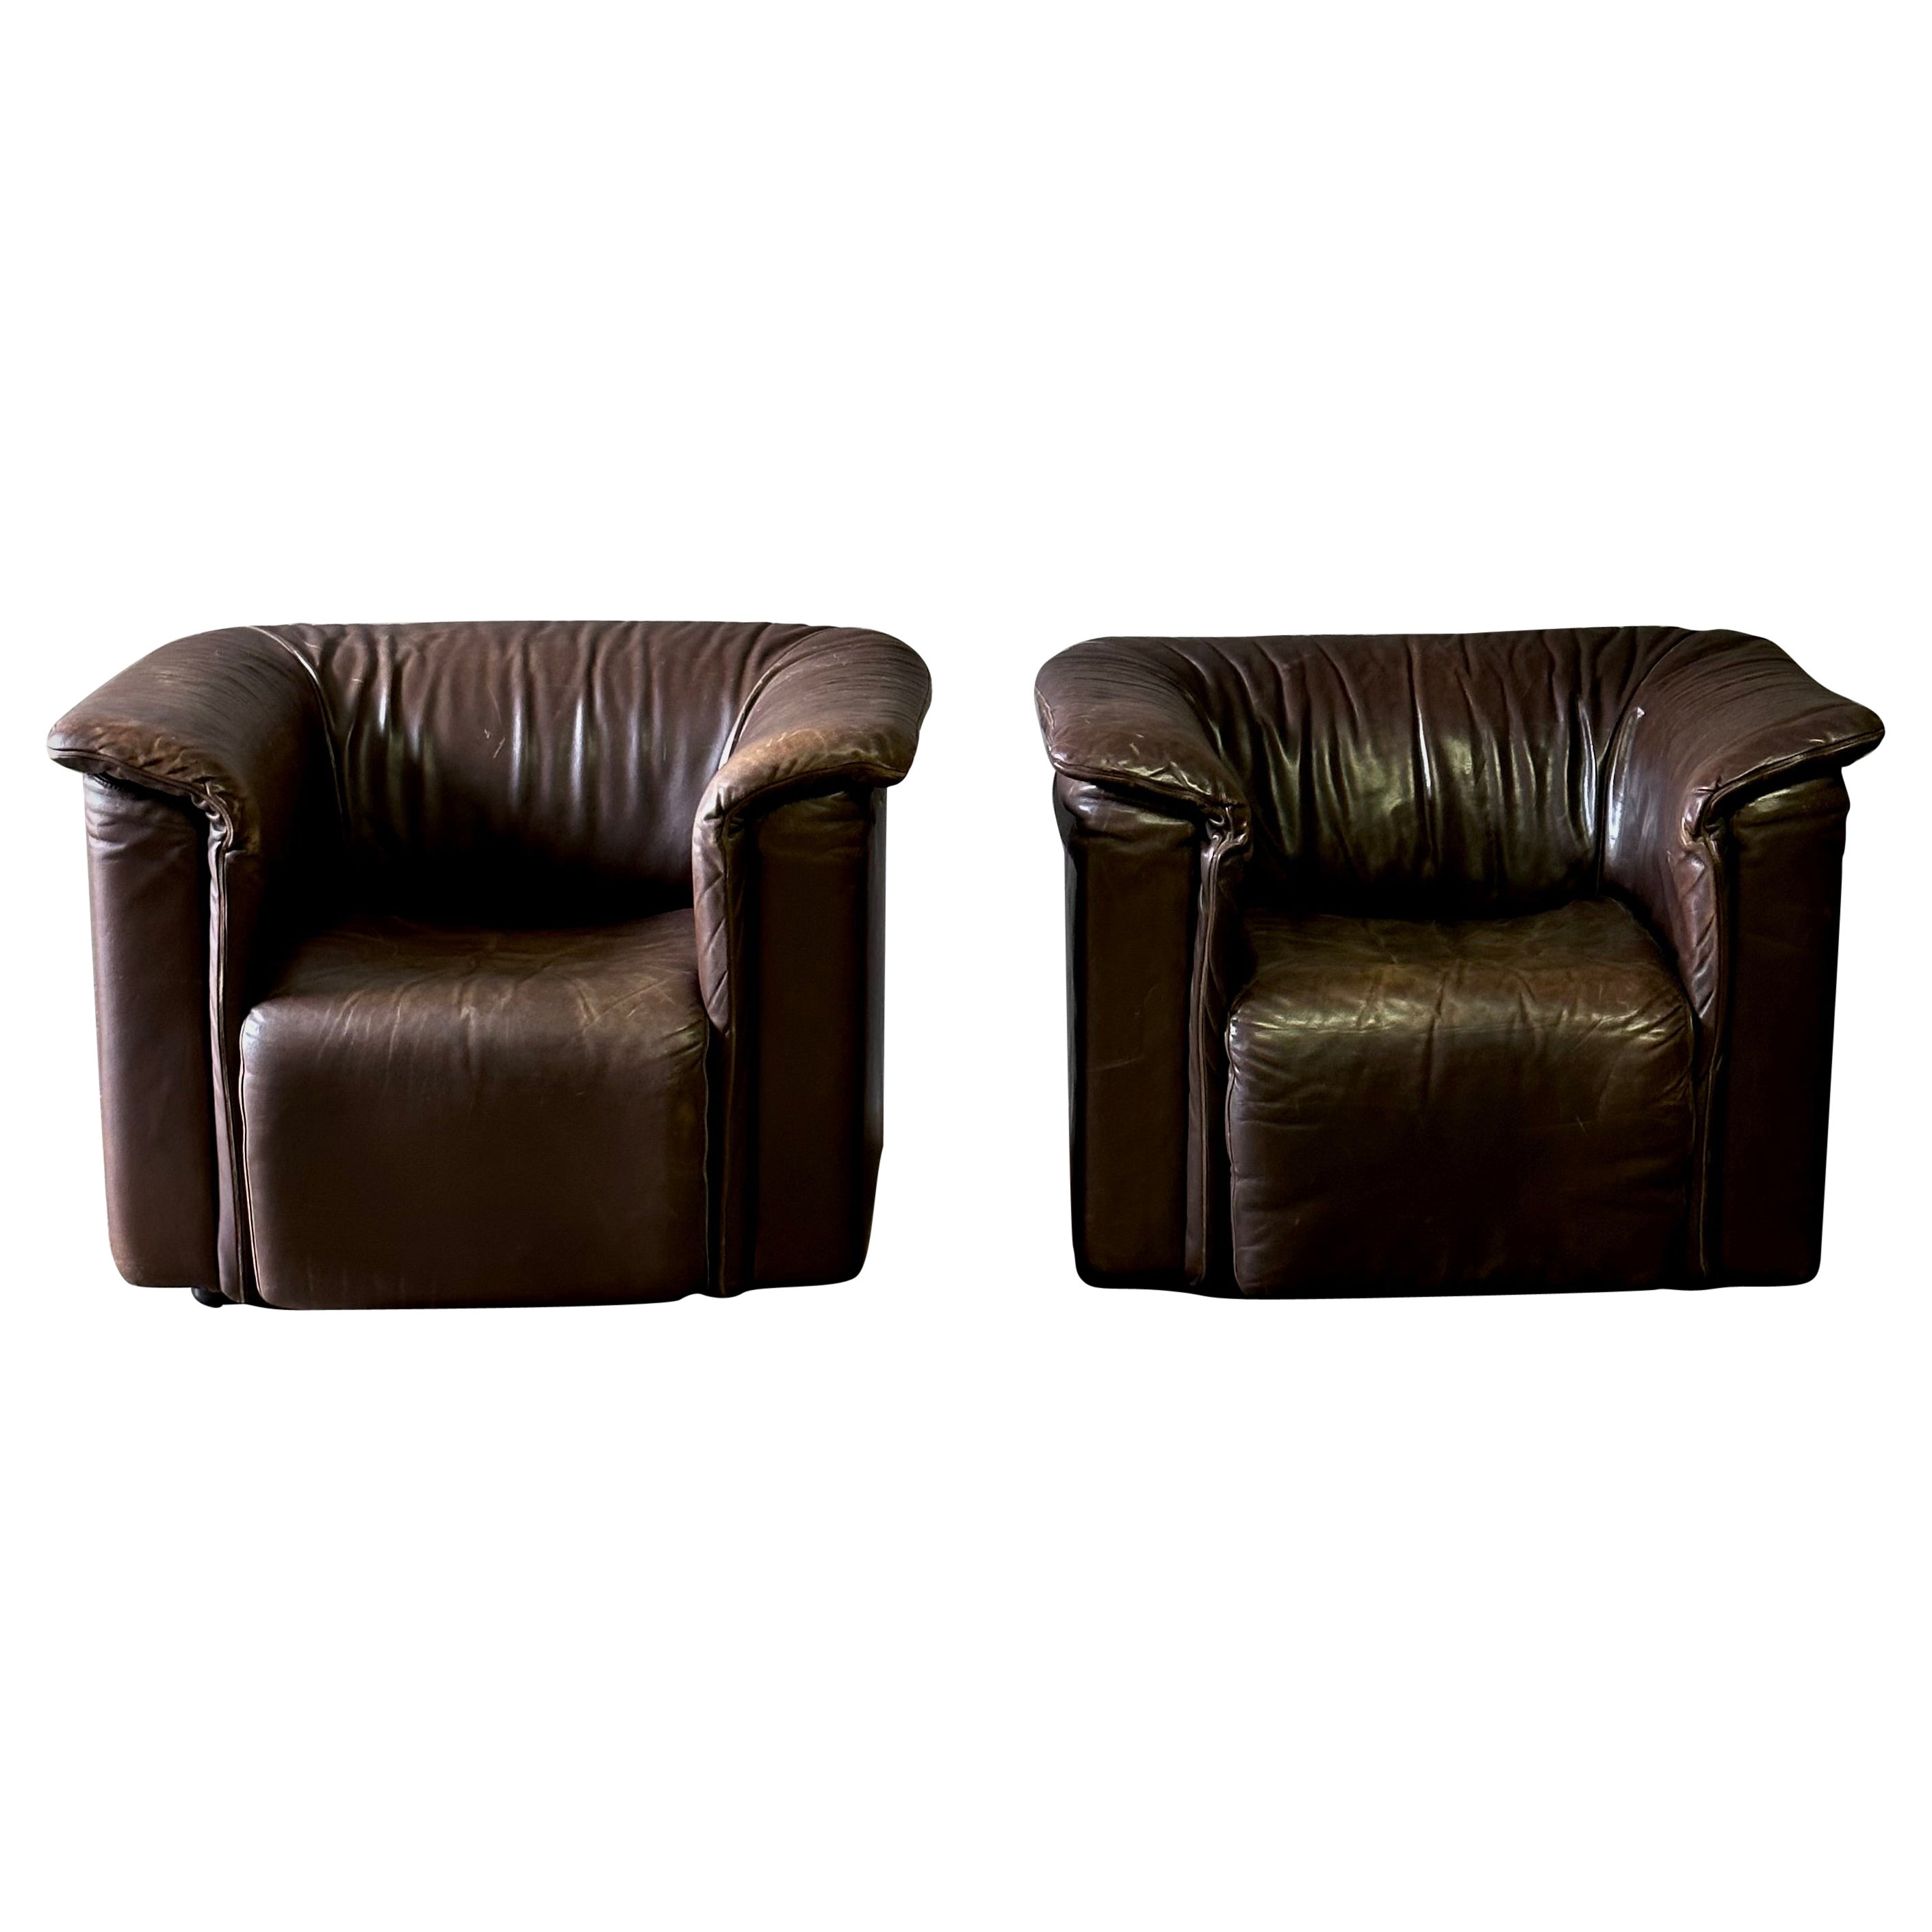 Pair of Leather Chairs For Sale